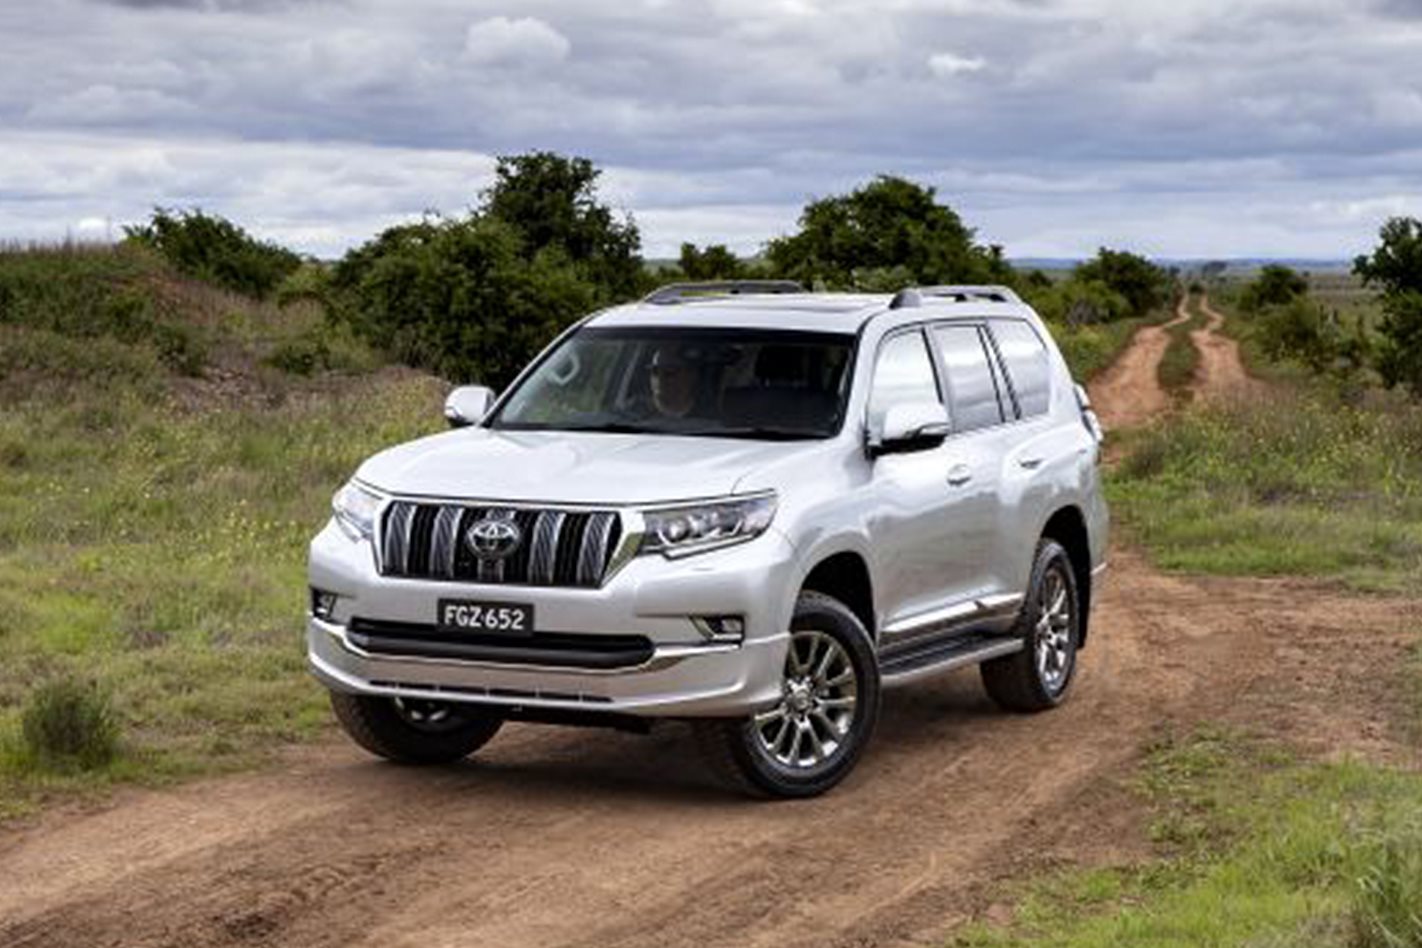 Toyota gives Prado a big power and equipment boost